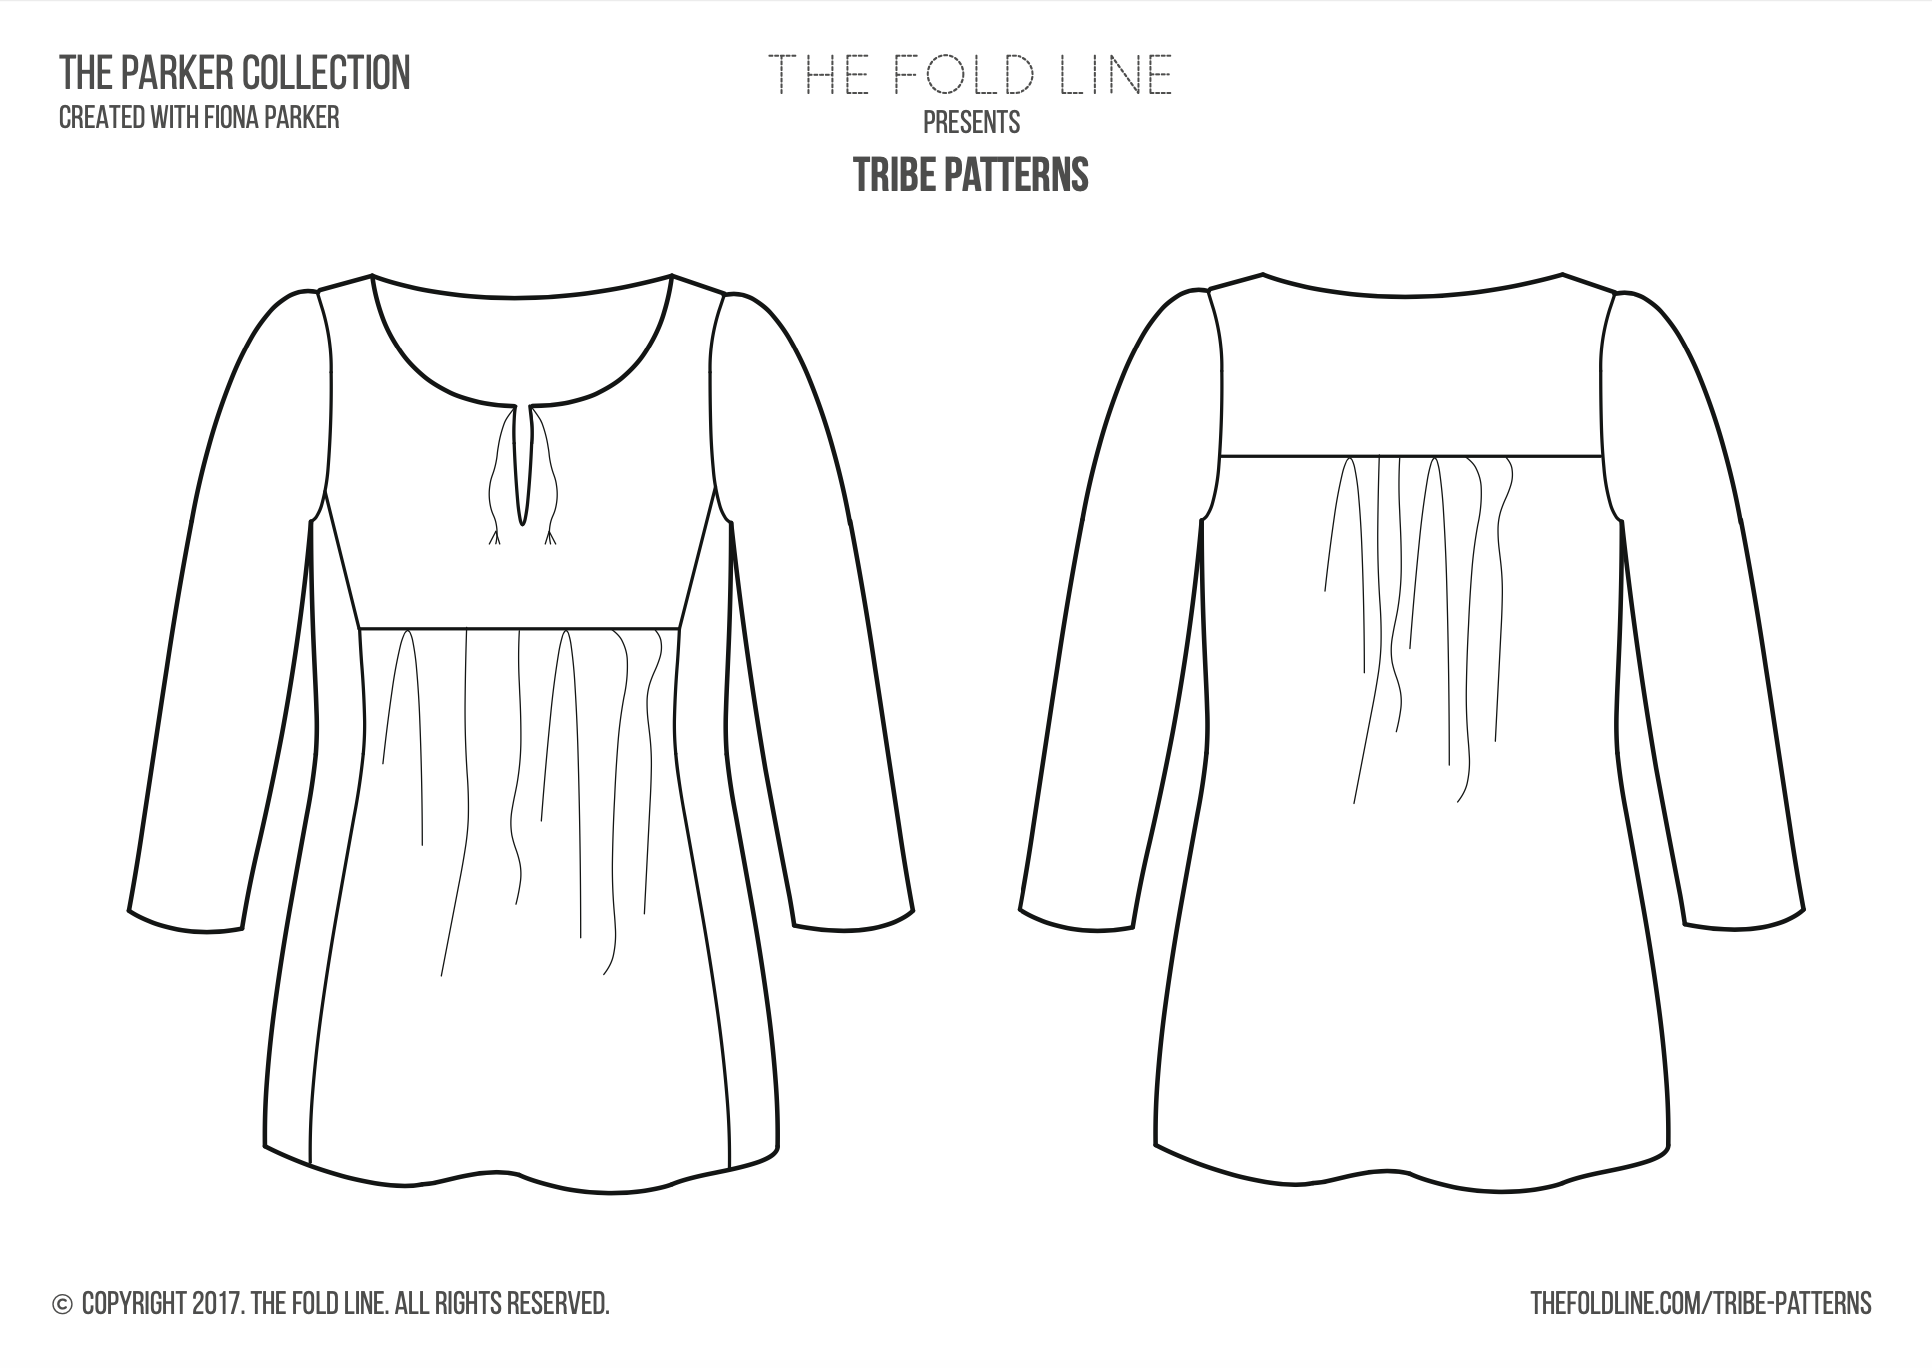 Parker Collection Embroidery & Tassel Tutorial - The Fold Line